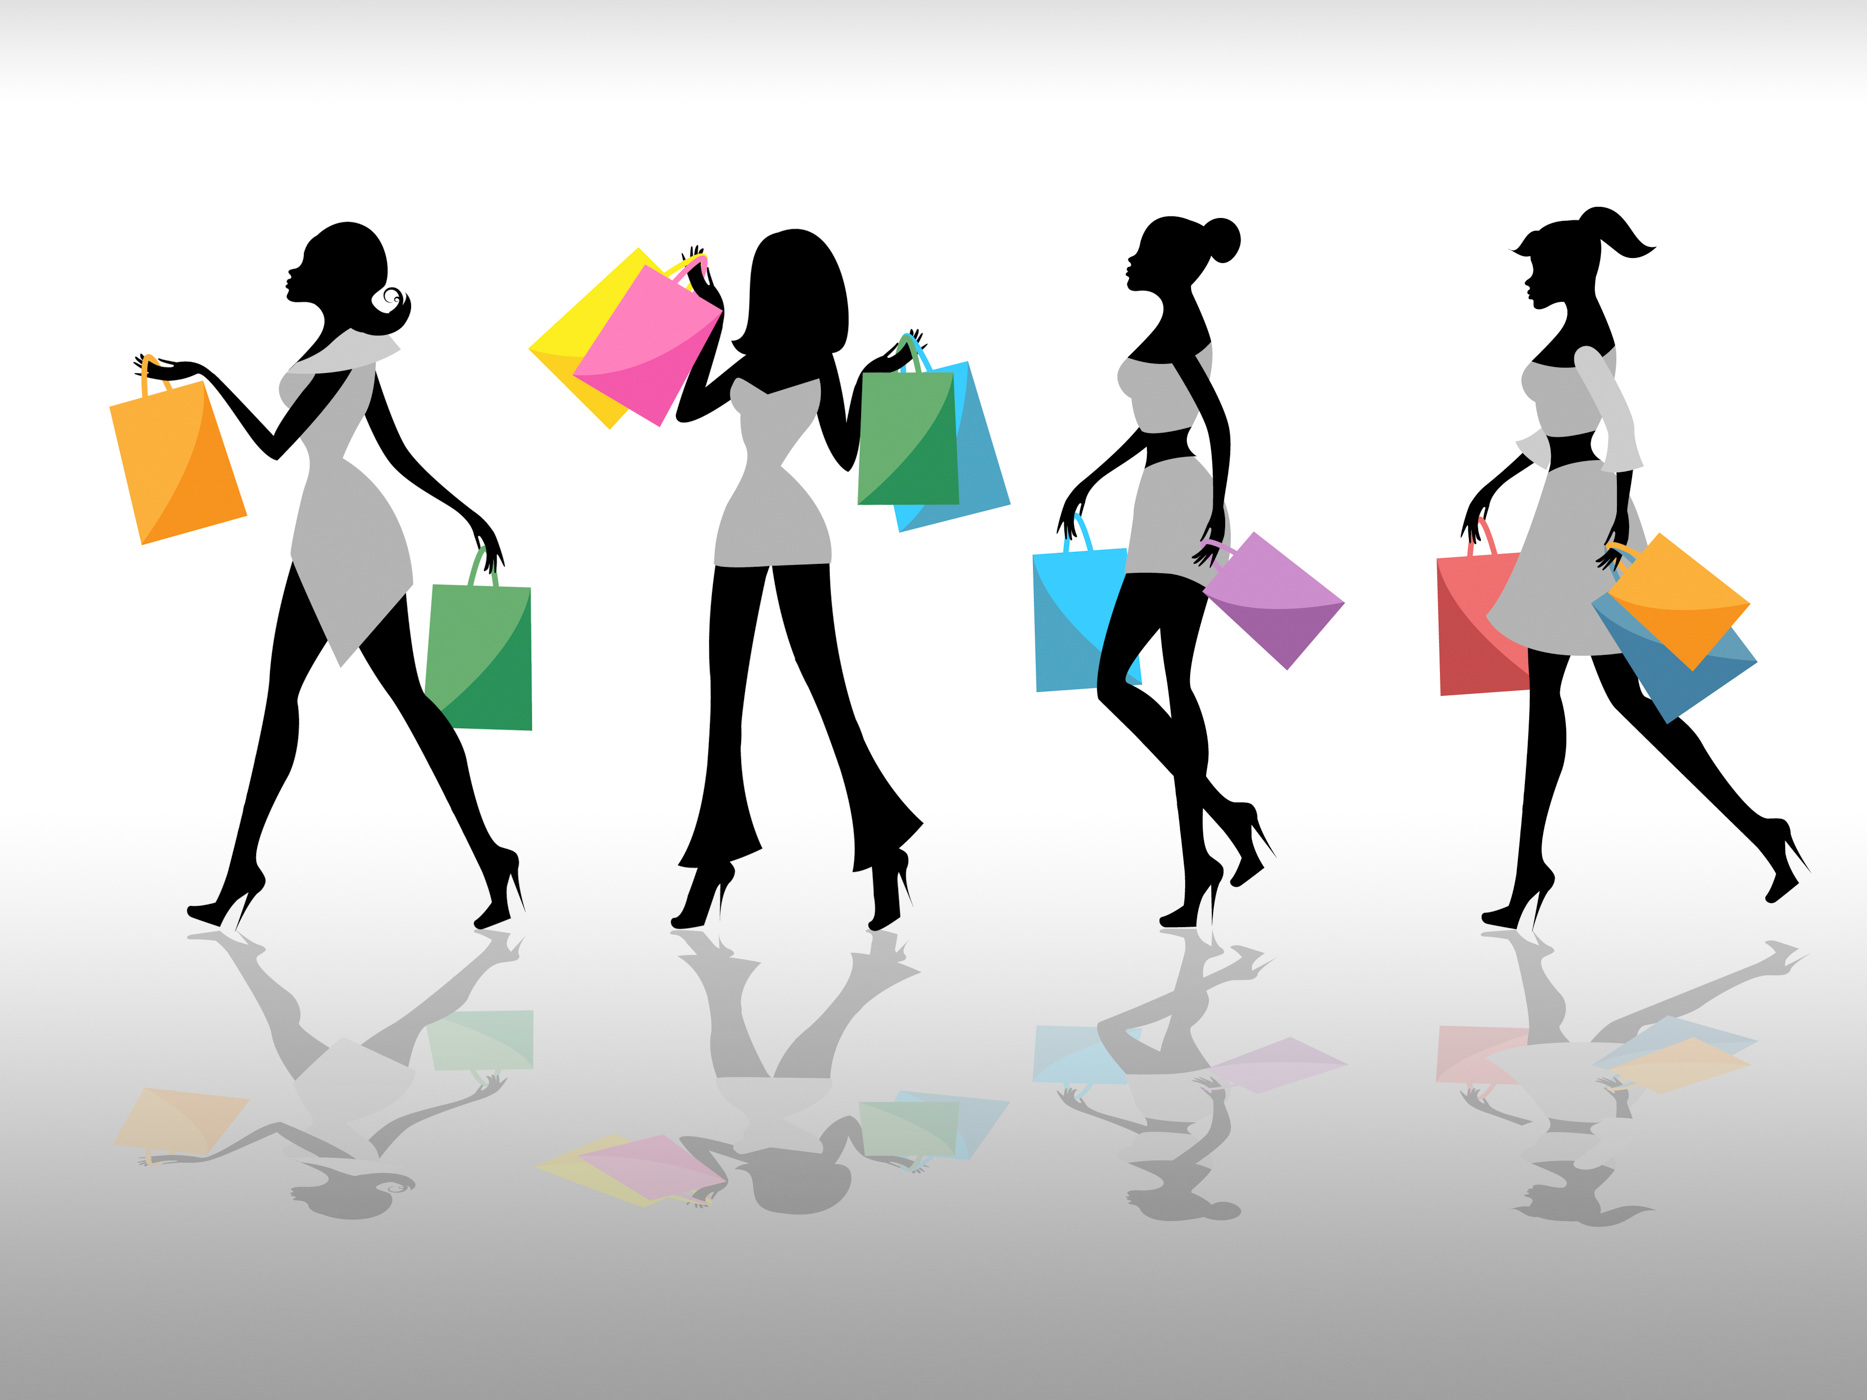 Women shopping indicates retail sales and adult photo